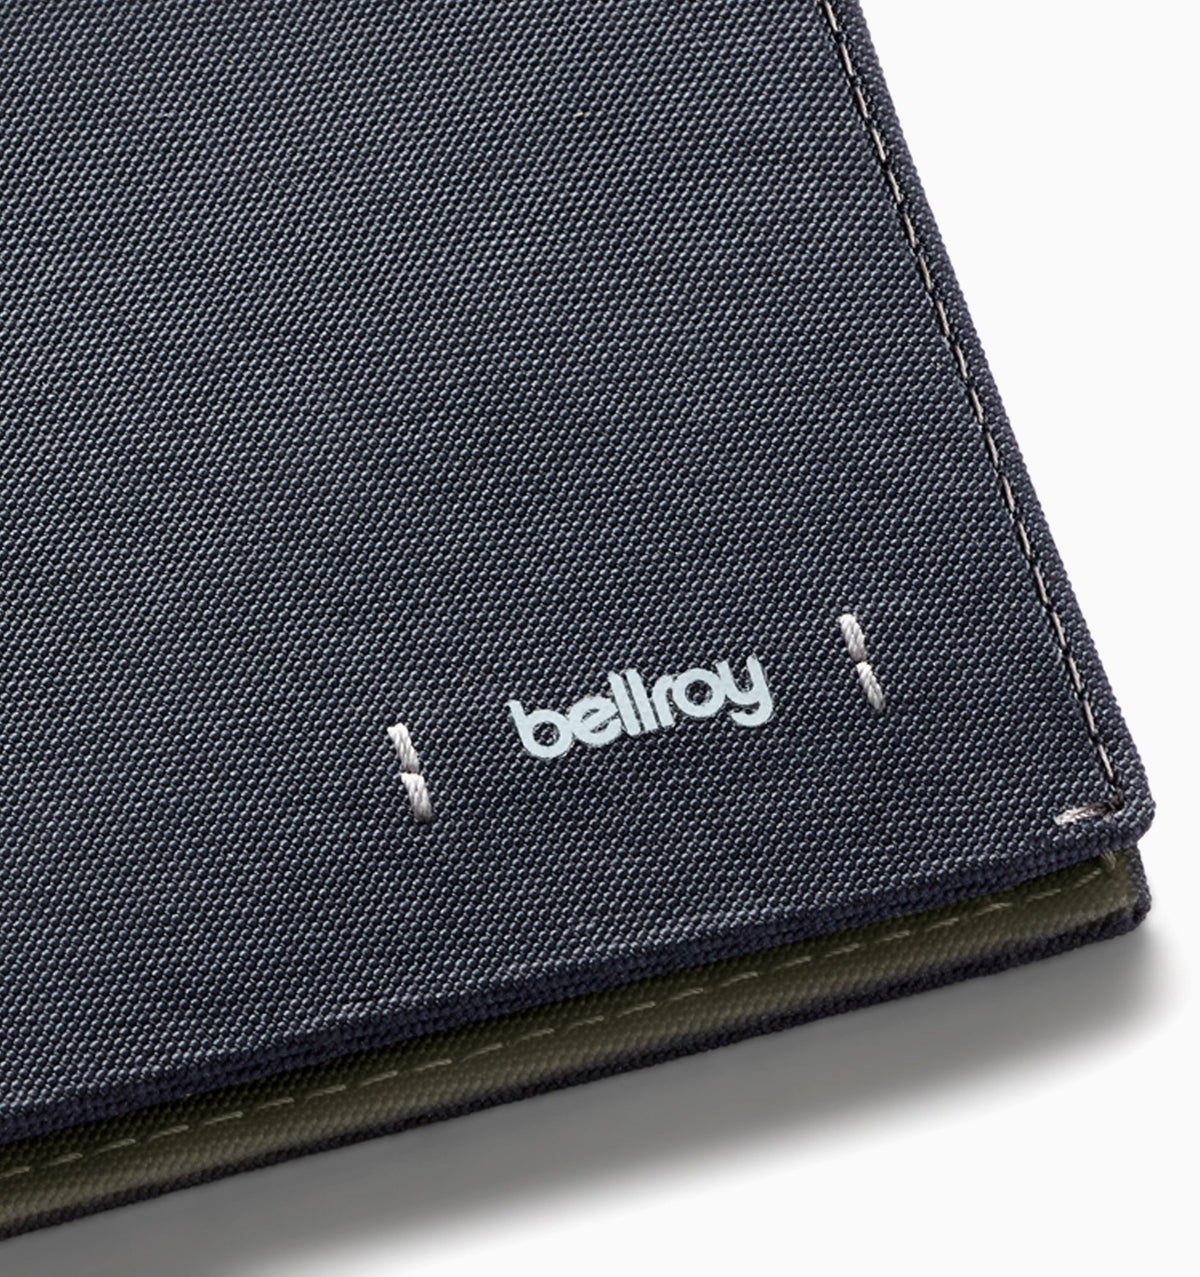 Bellroy Note Sleeve Wallet - Charcoal-Woven